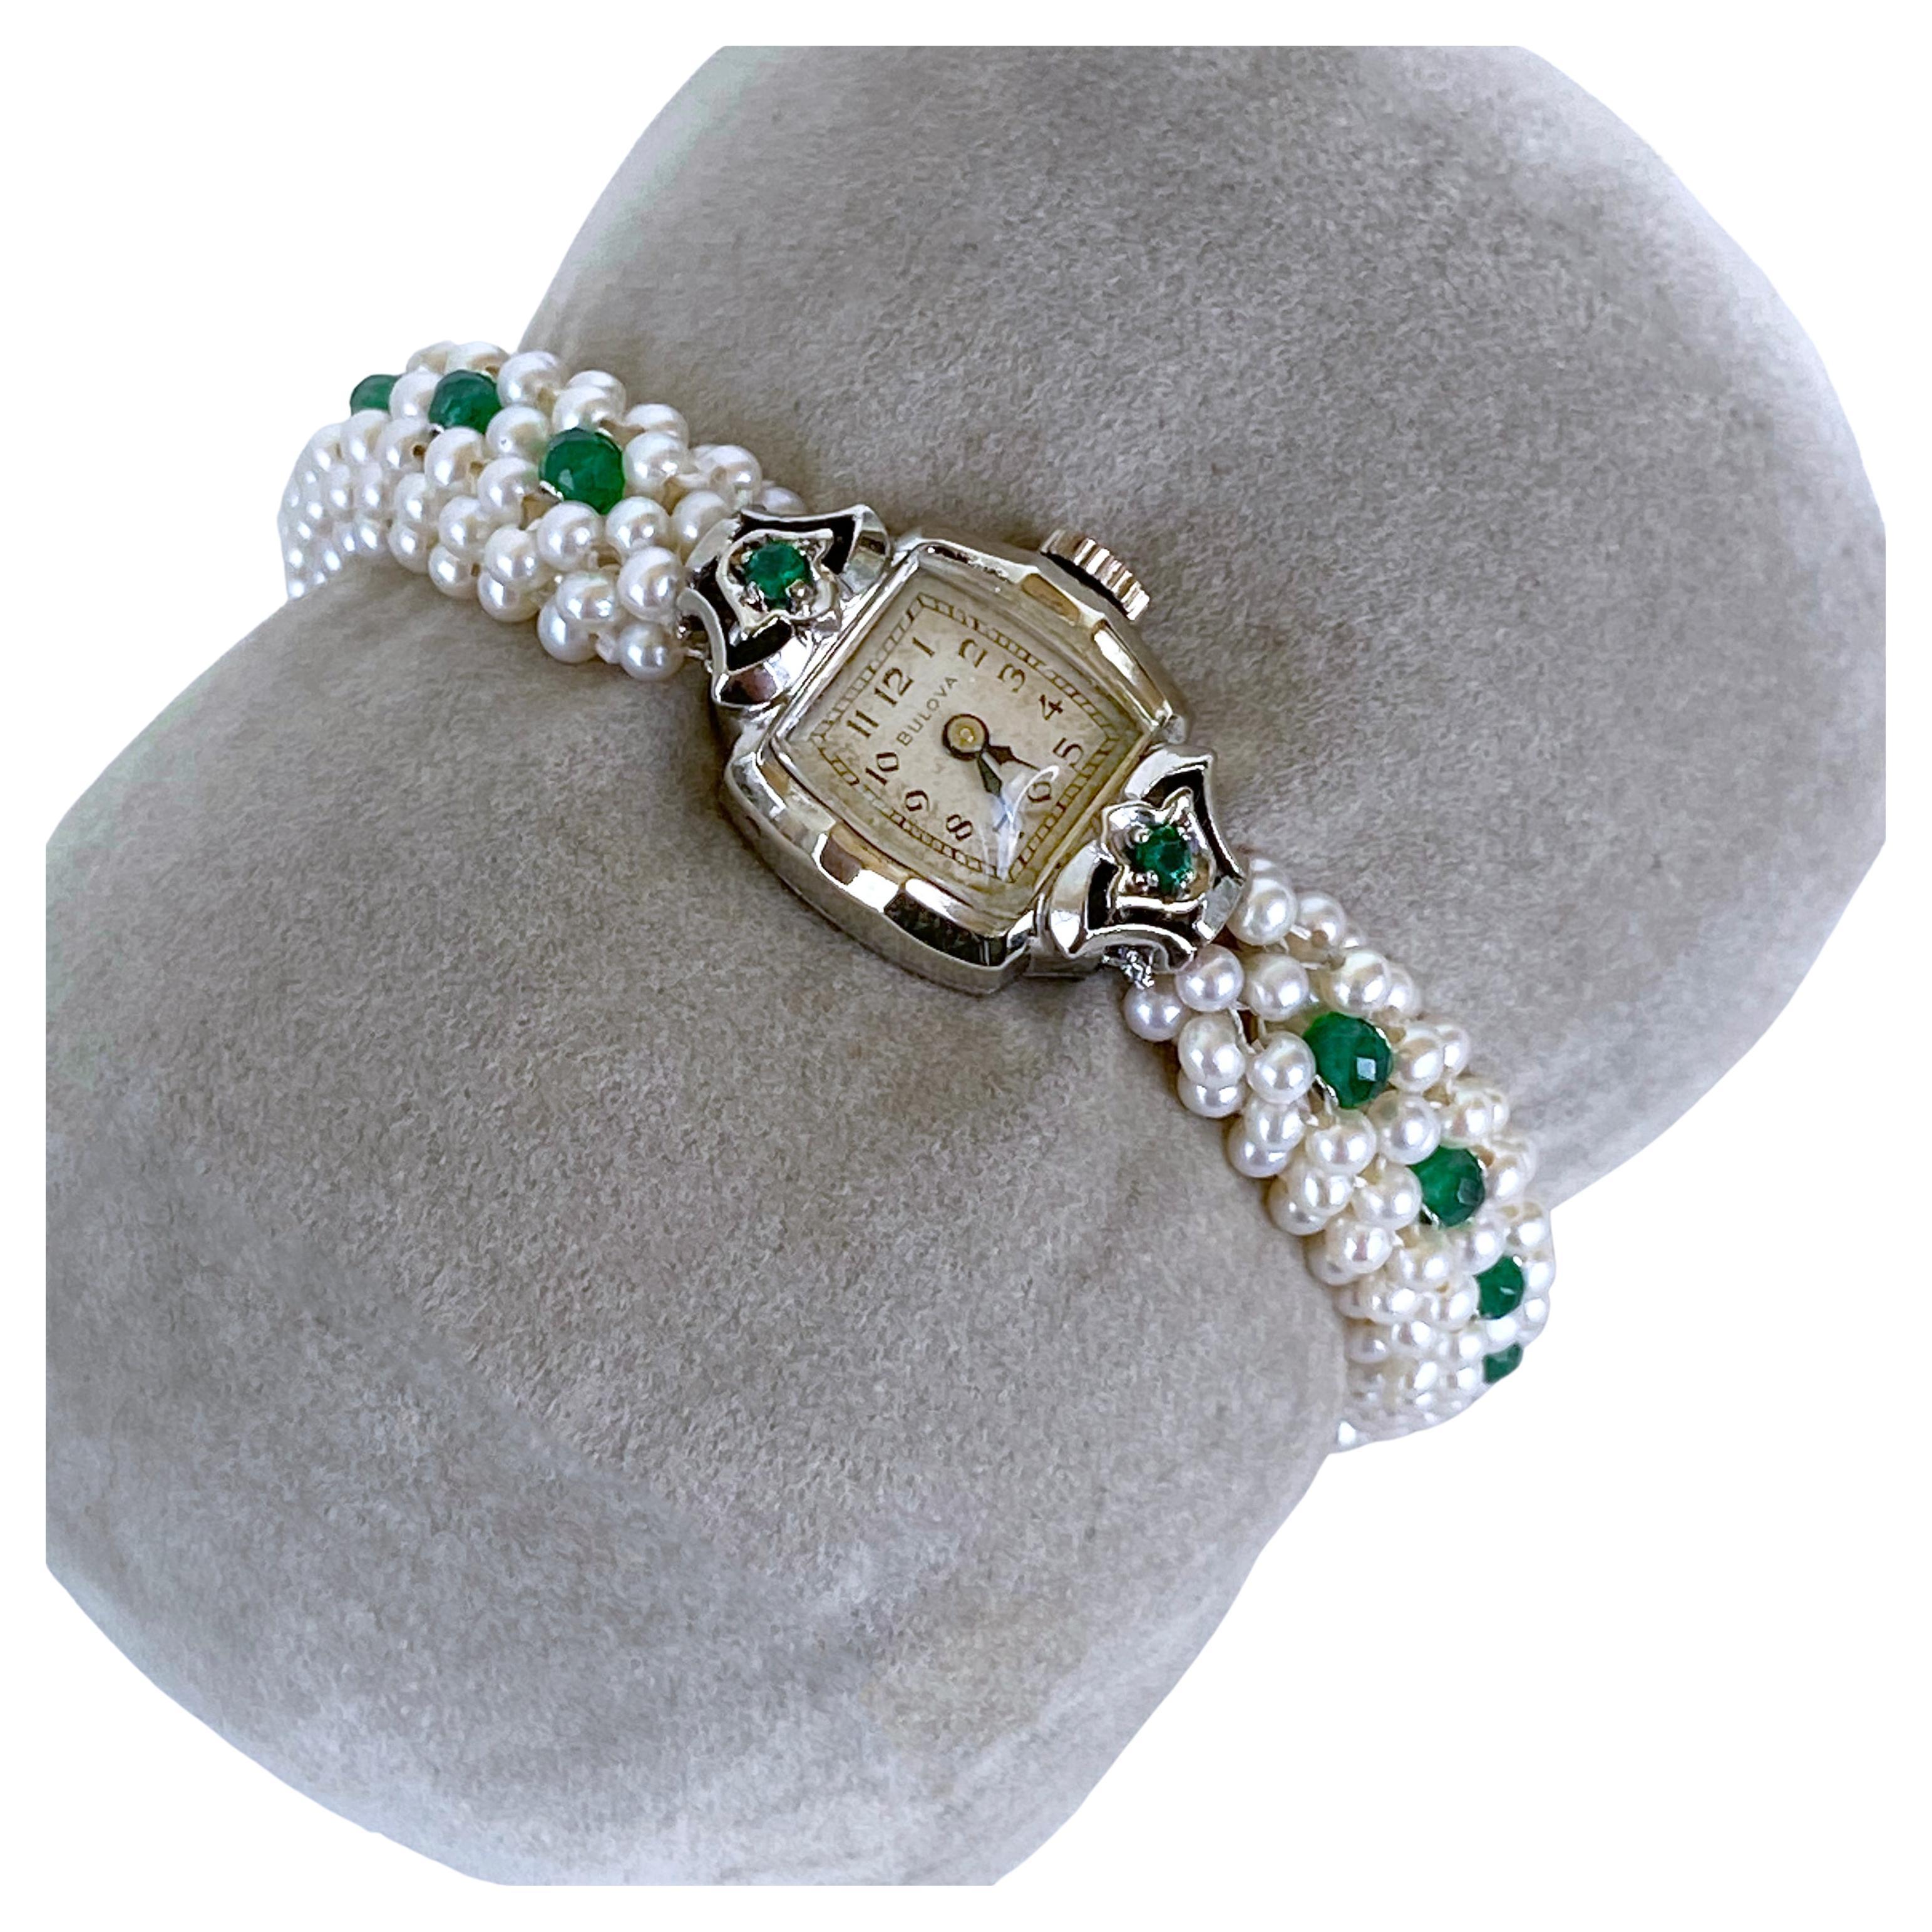 Cushion Cut Marina J. Emerald Encrusted Vintage Watch with Pearls and 14k White Gold For Sale